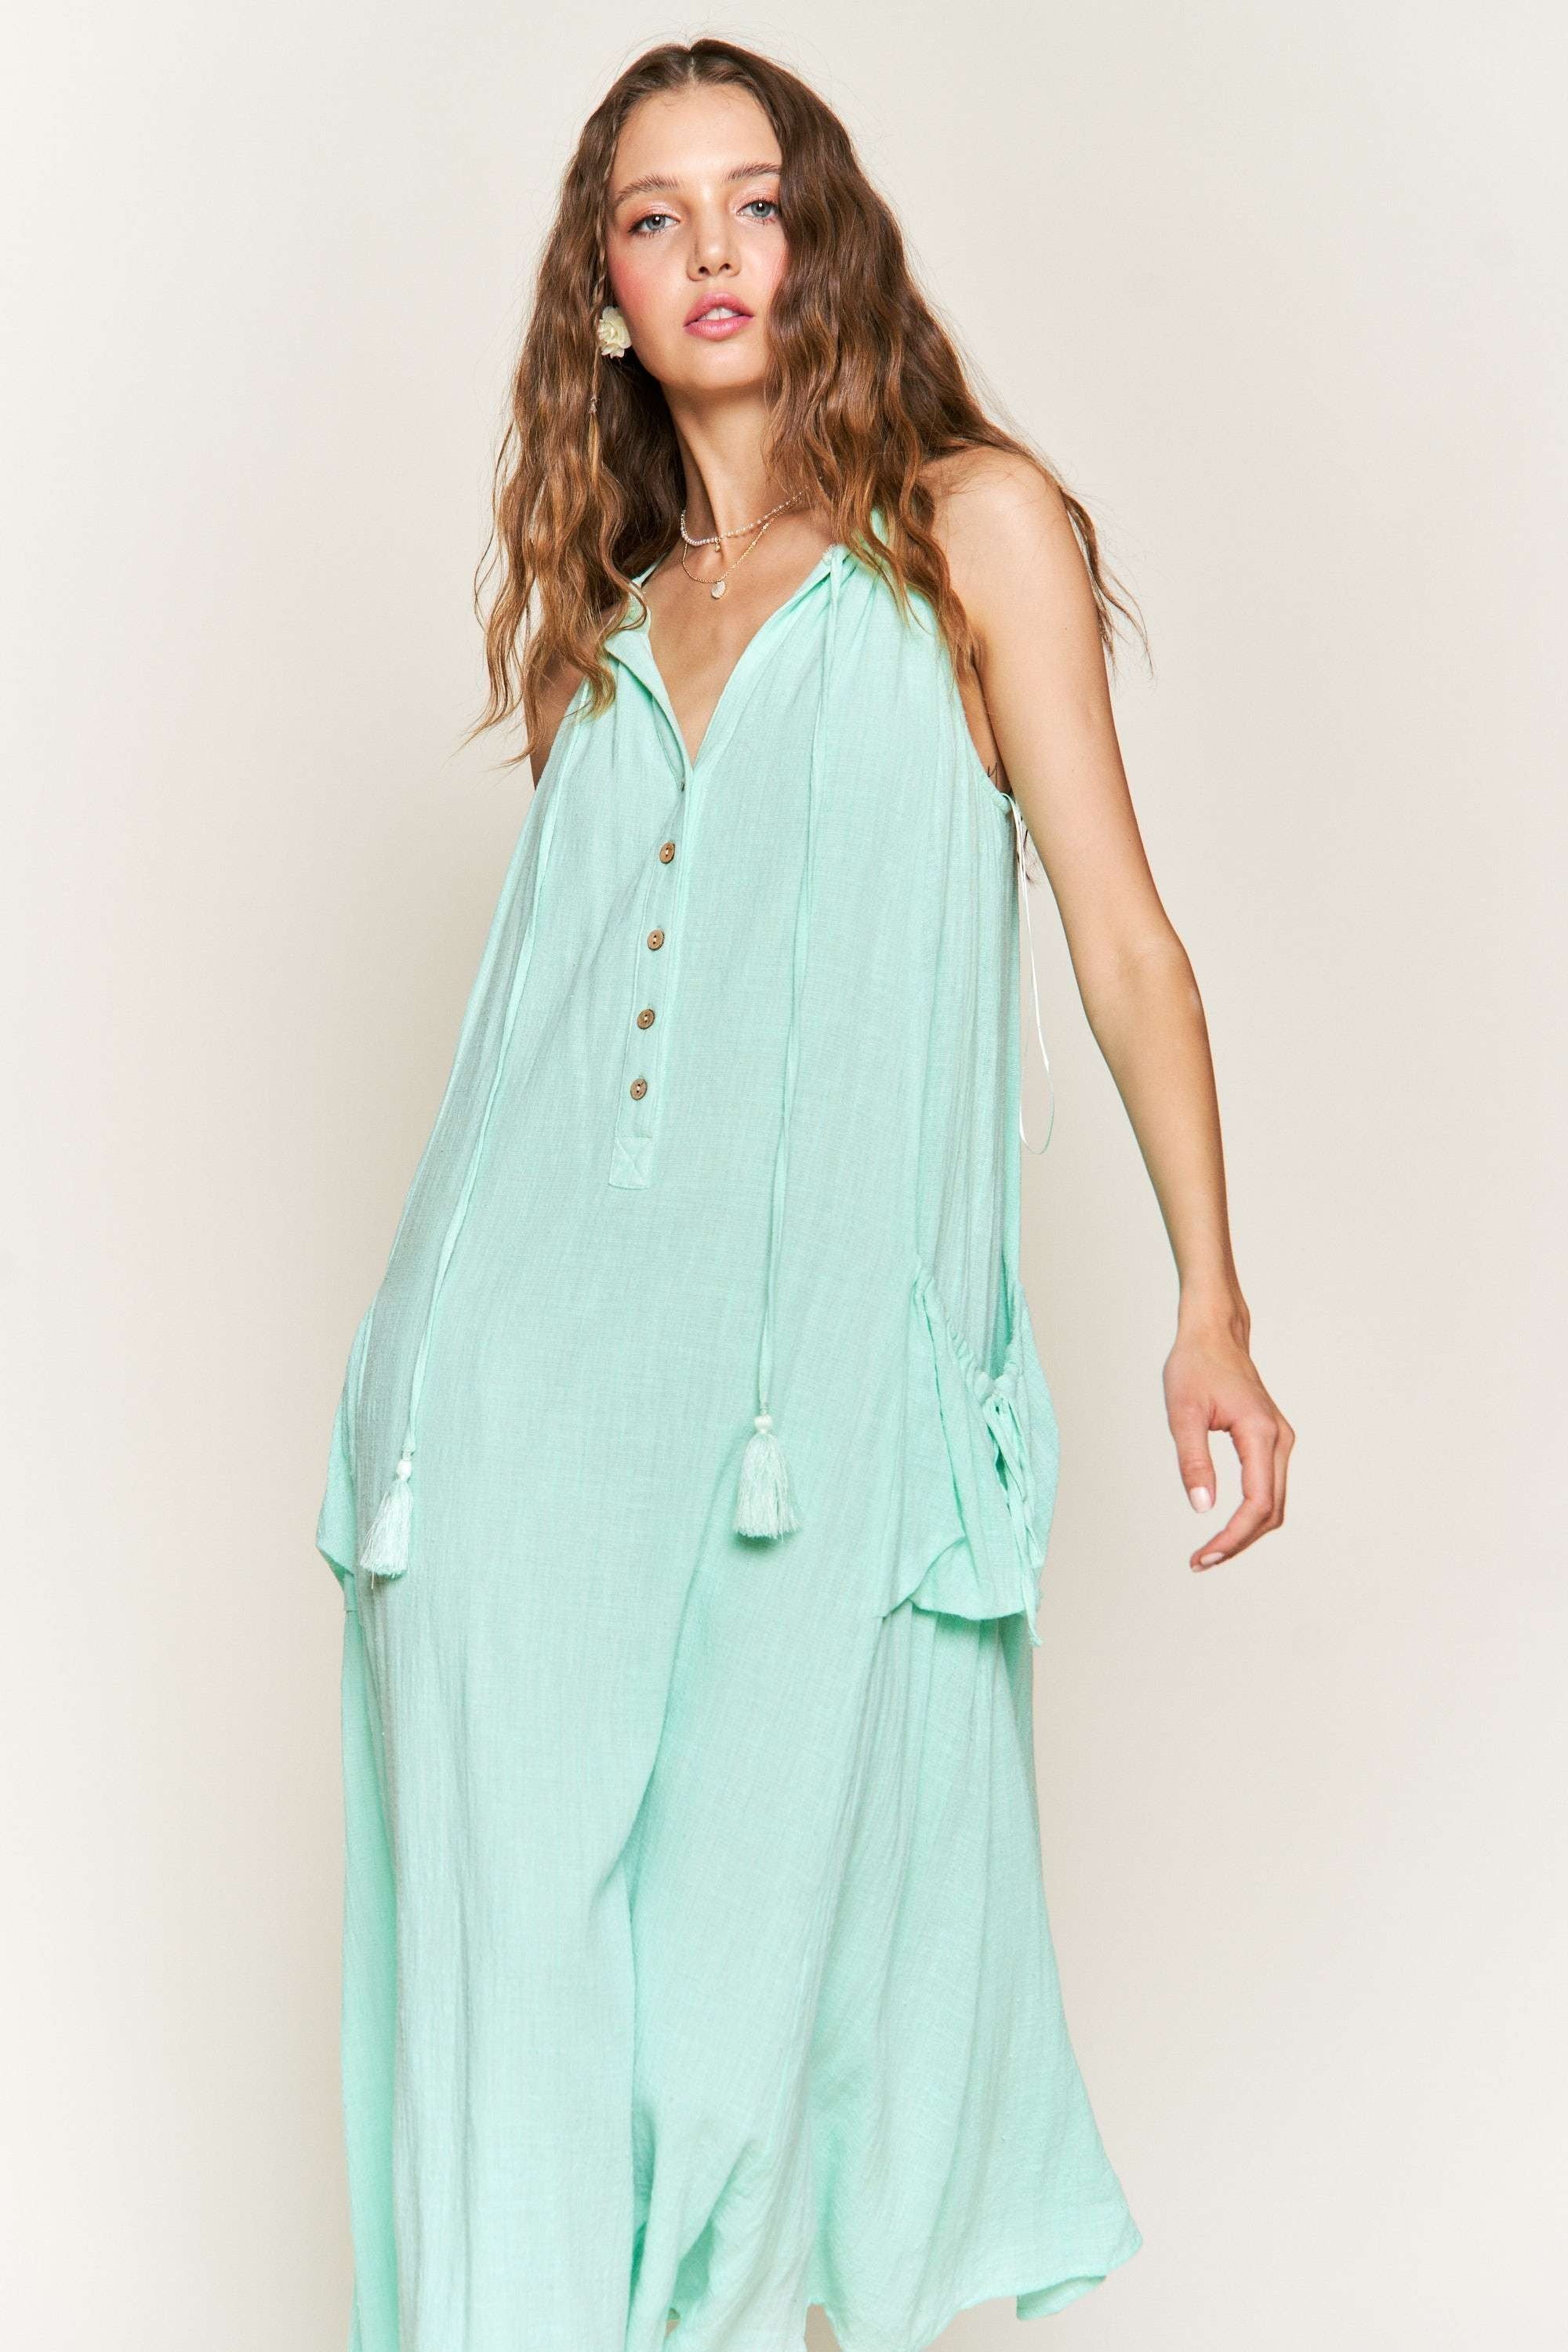 Mint Maxi Dress With Button Details | Collective Request 